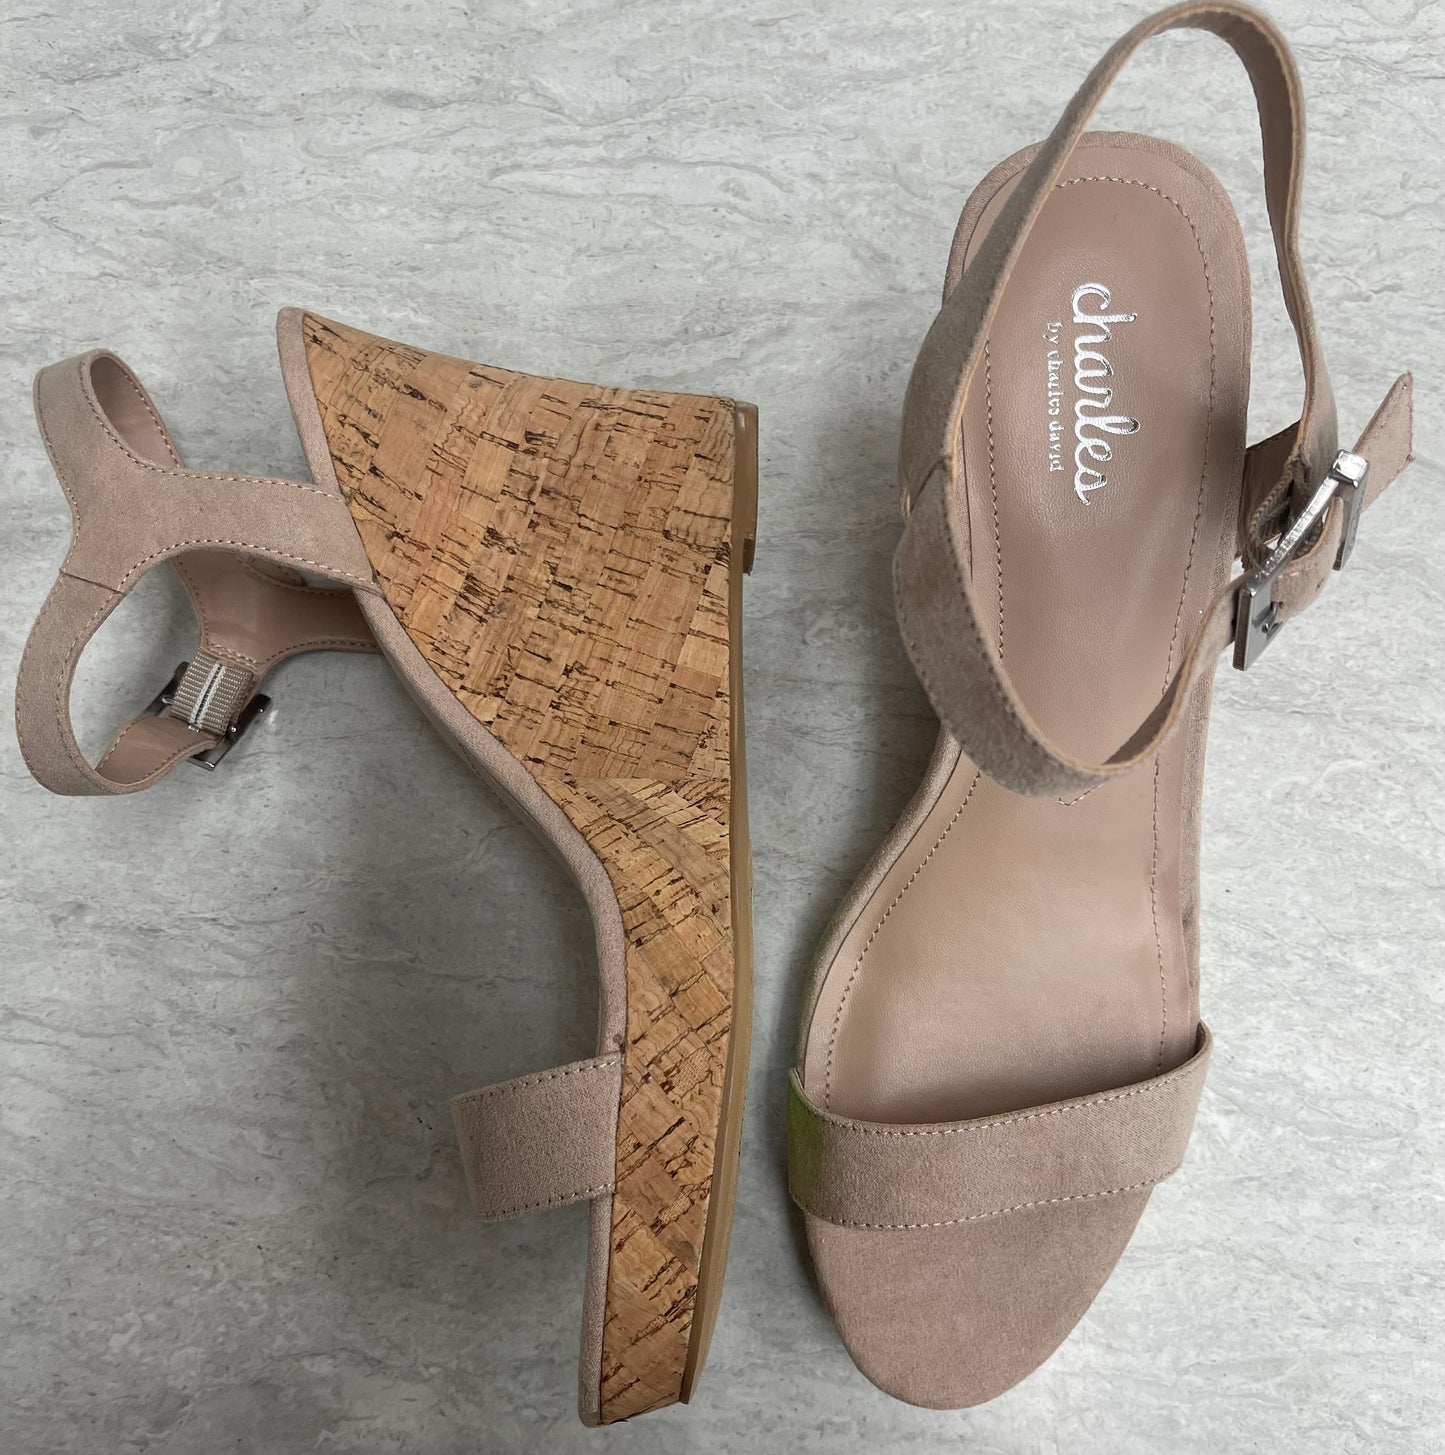 Sandals Heels Wedge By Charles By Charles David  Size: 11